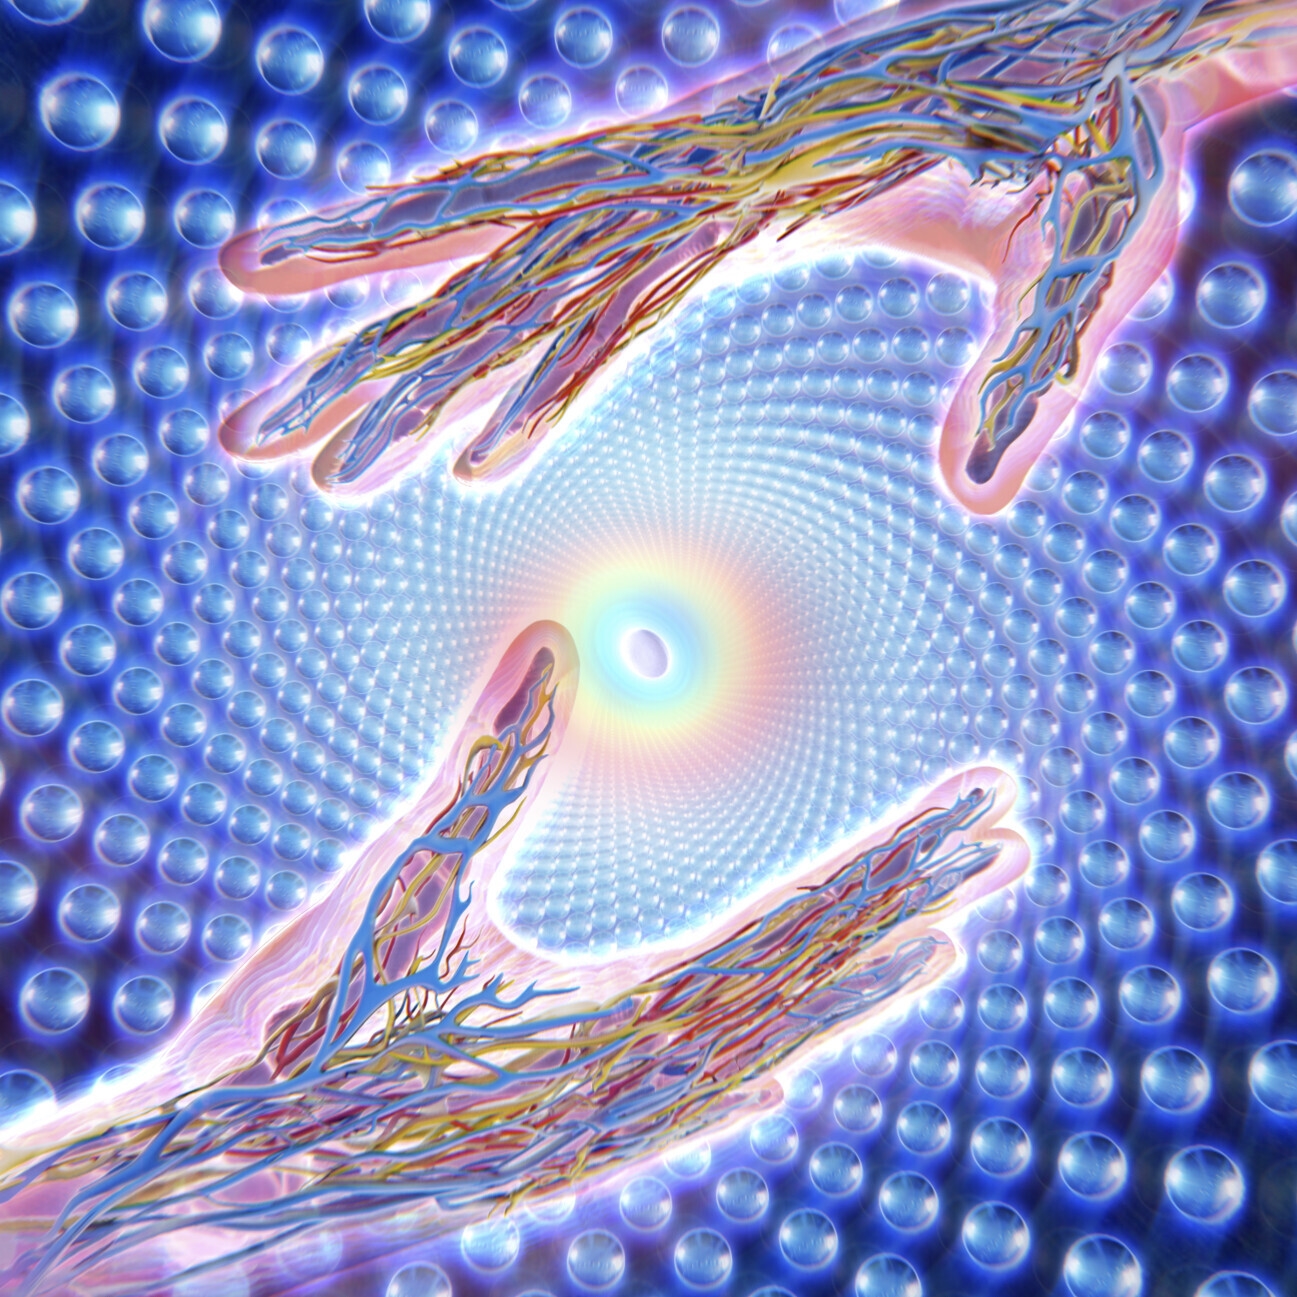 Artwork by Alex Grey, Psychedelic Healing, Made of single-channel video